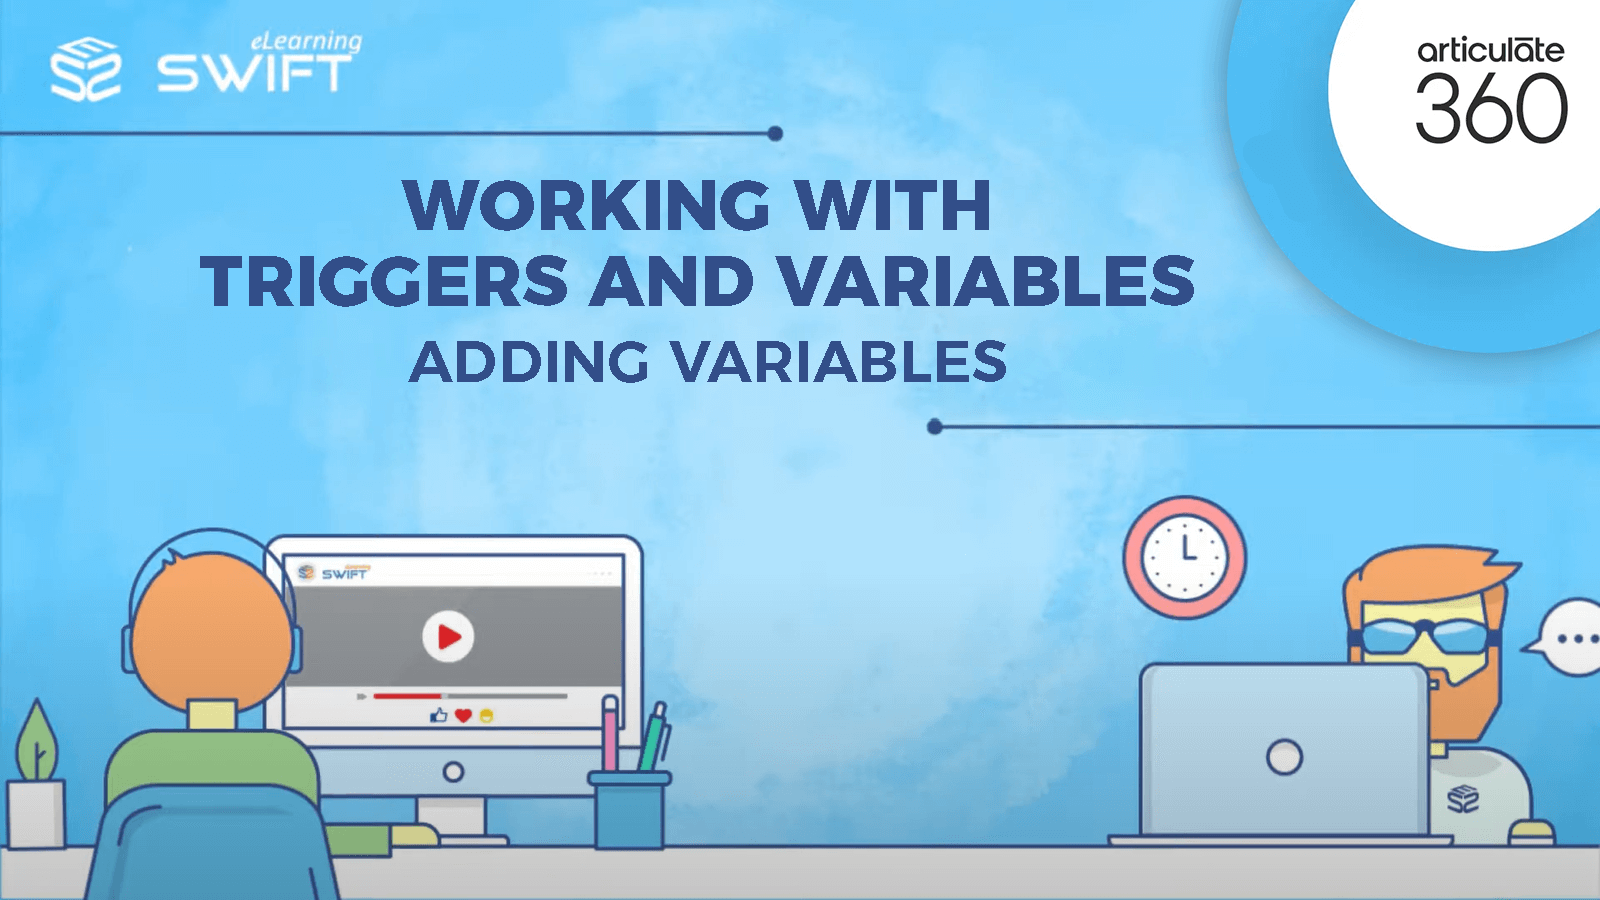 Adding Variables